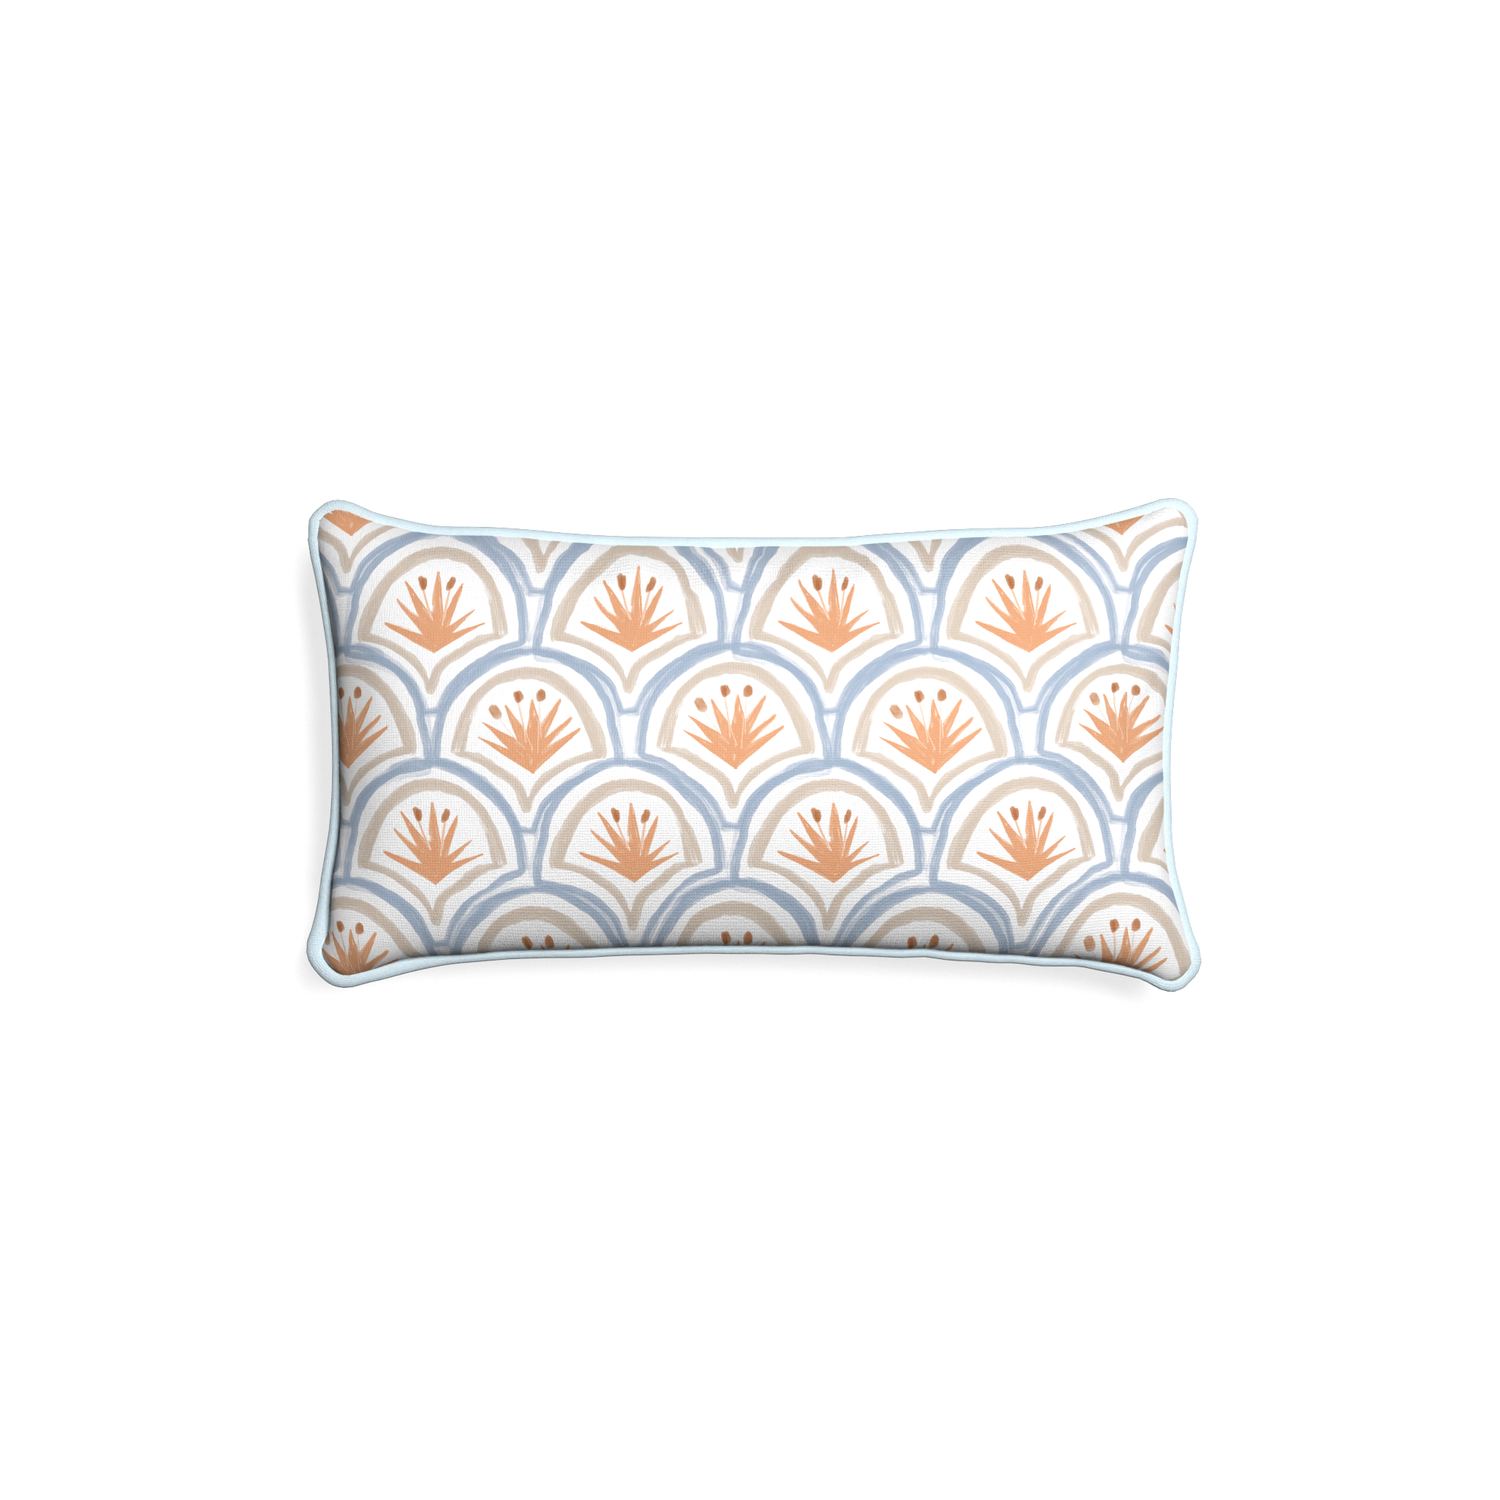 Petite-lumbar thatcher apricot custom art deco palm patternpillow with powder piping on white background